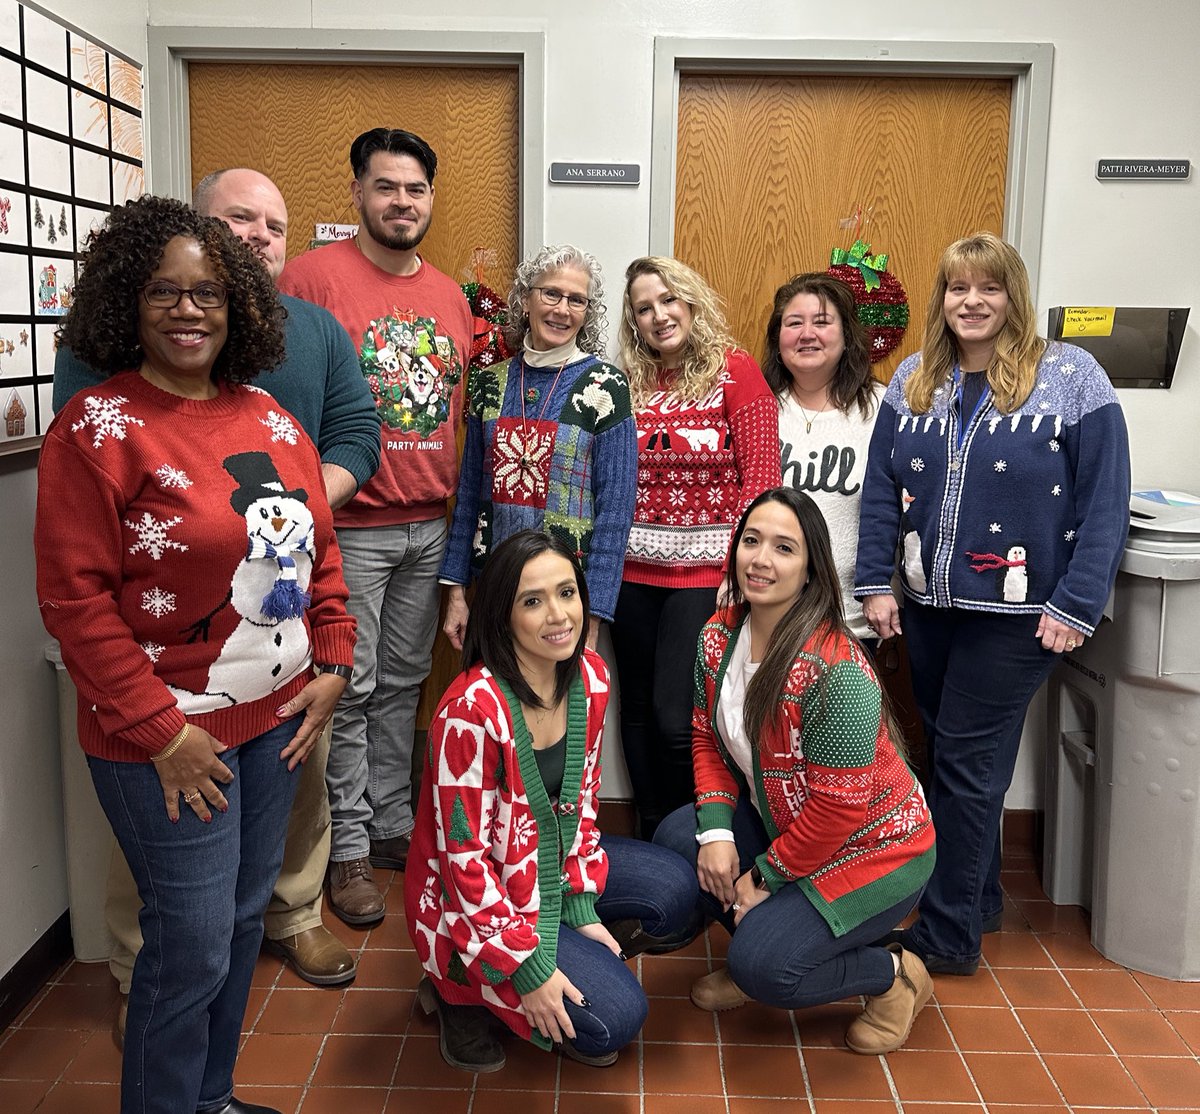 Addison Employment Office with our Holiday Sweaters! #spiritweek @CP_UPSers @UPSers @ExperienceUPS